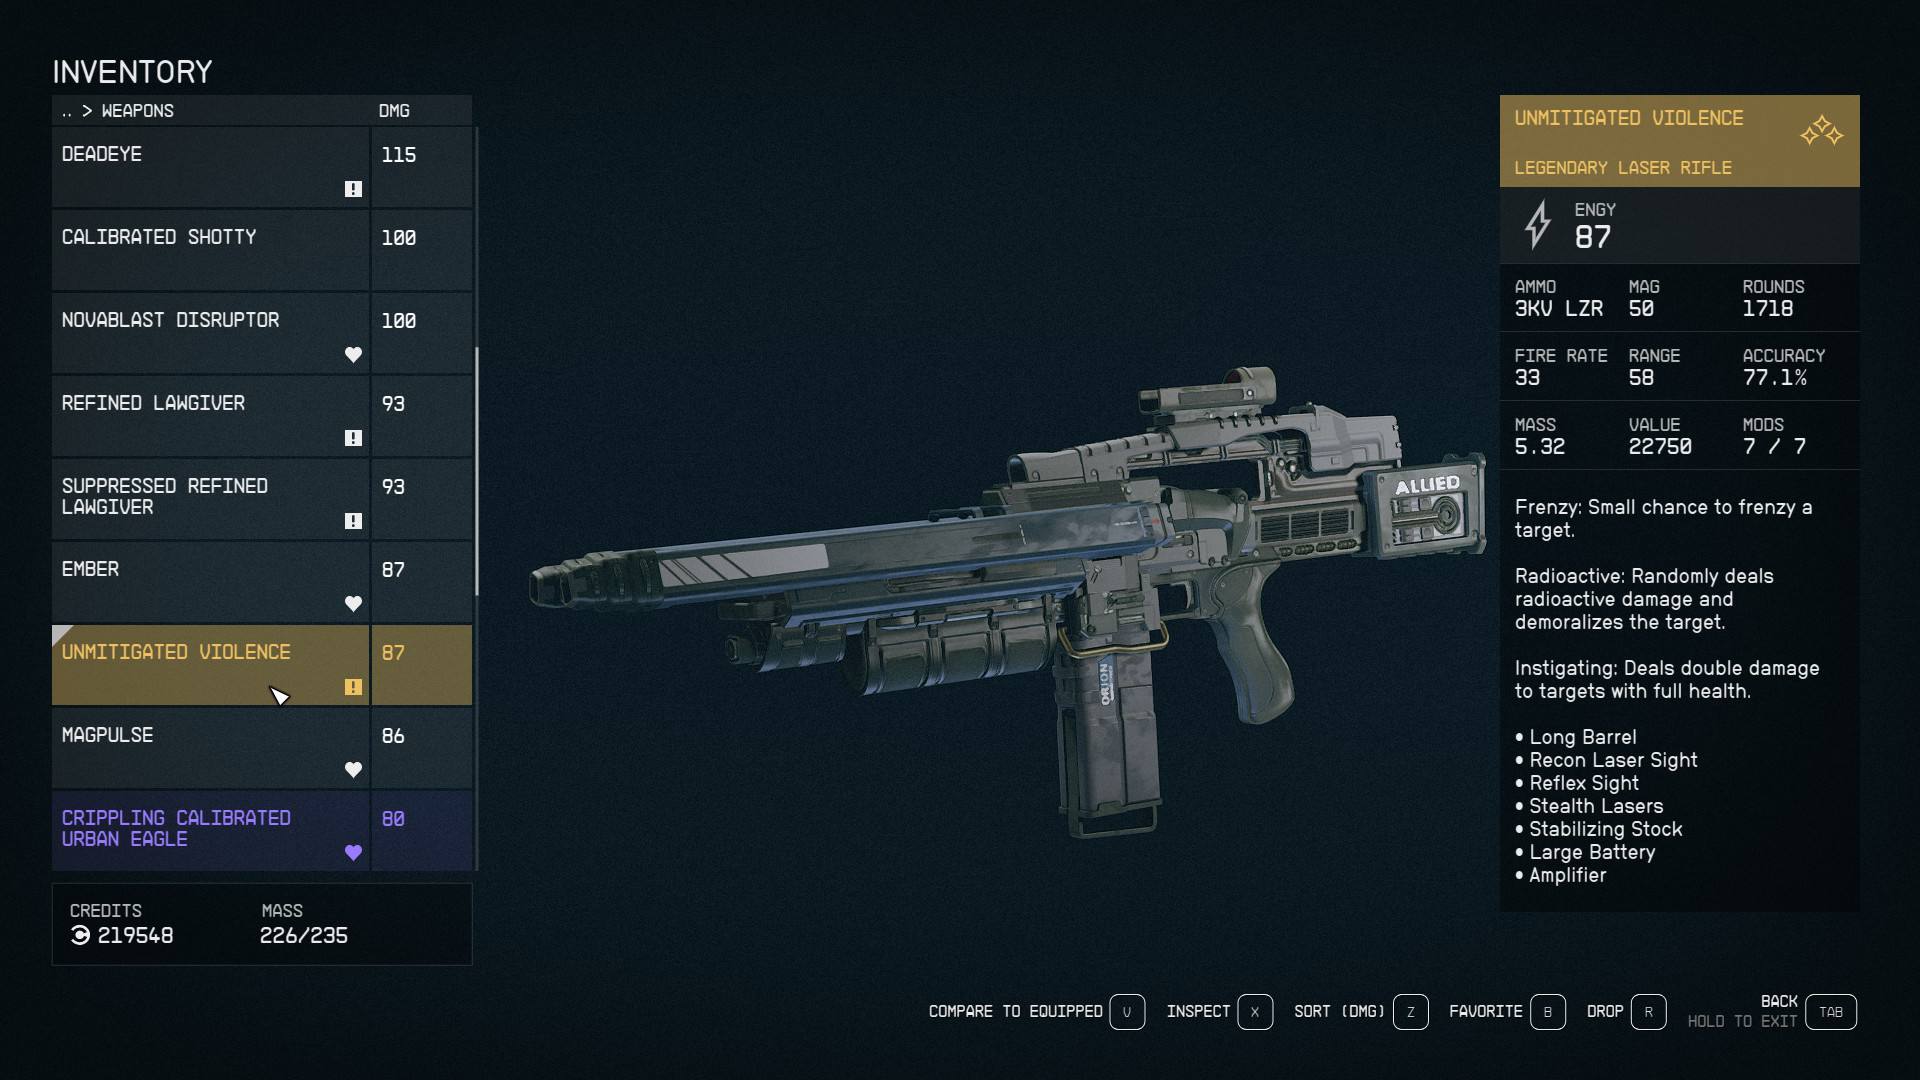 Best Starfield weapons: The Unmitigated Violence gun in a player's inventory.